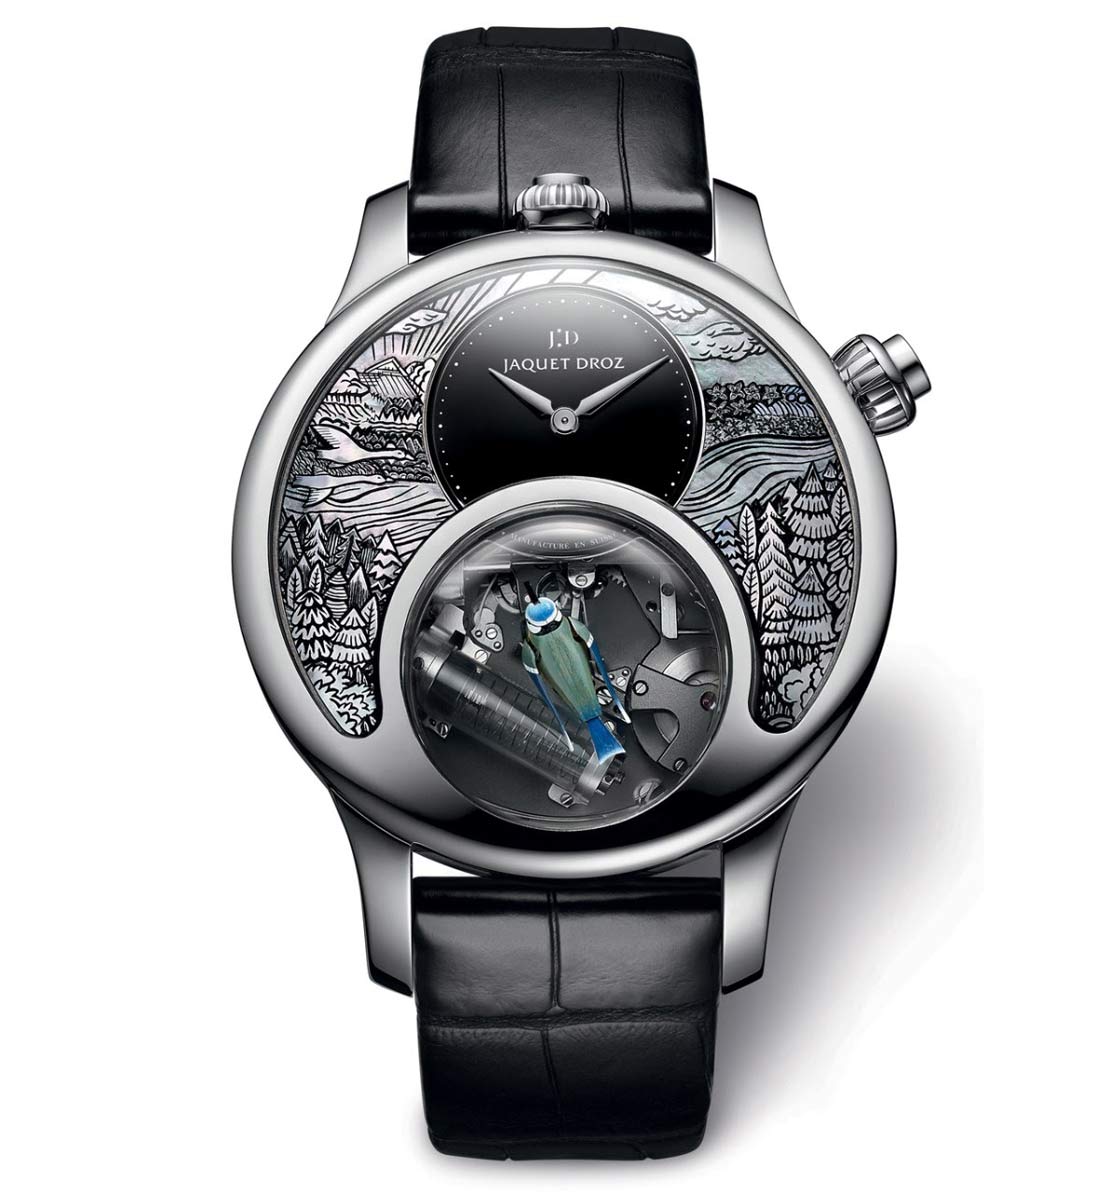 Jaquet Droz - Charming Bird | Time and Watches | The watch blog